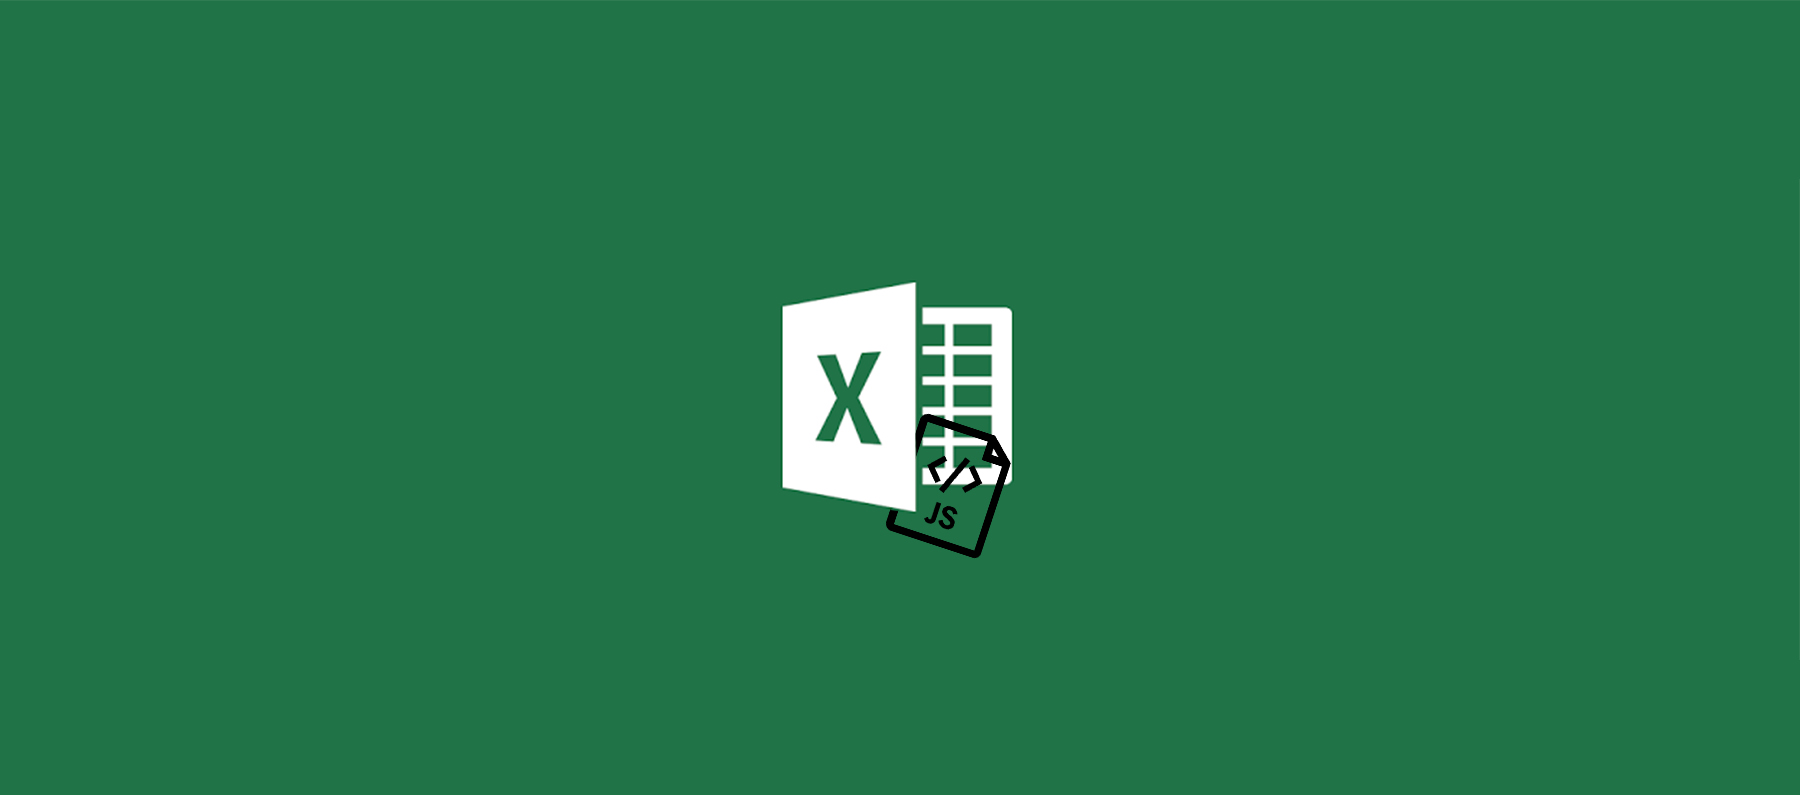 Icon of a Microsoft Excel document with a JavaScript logo inside it